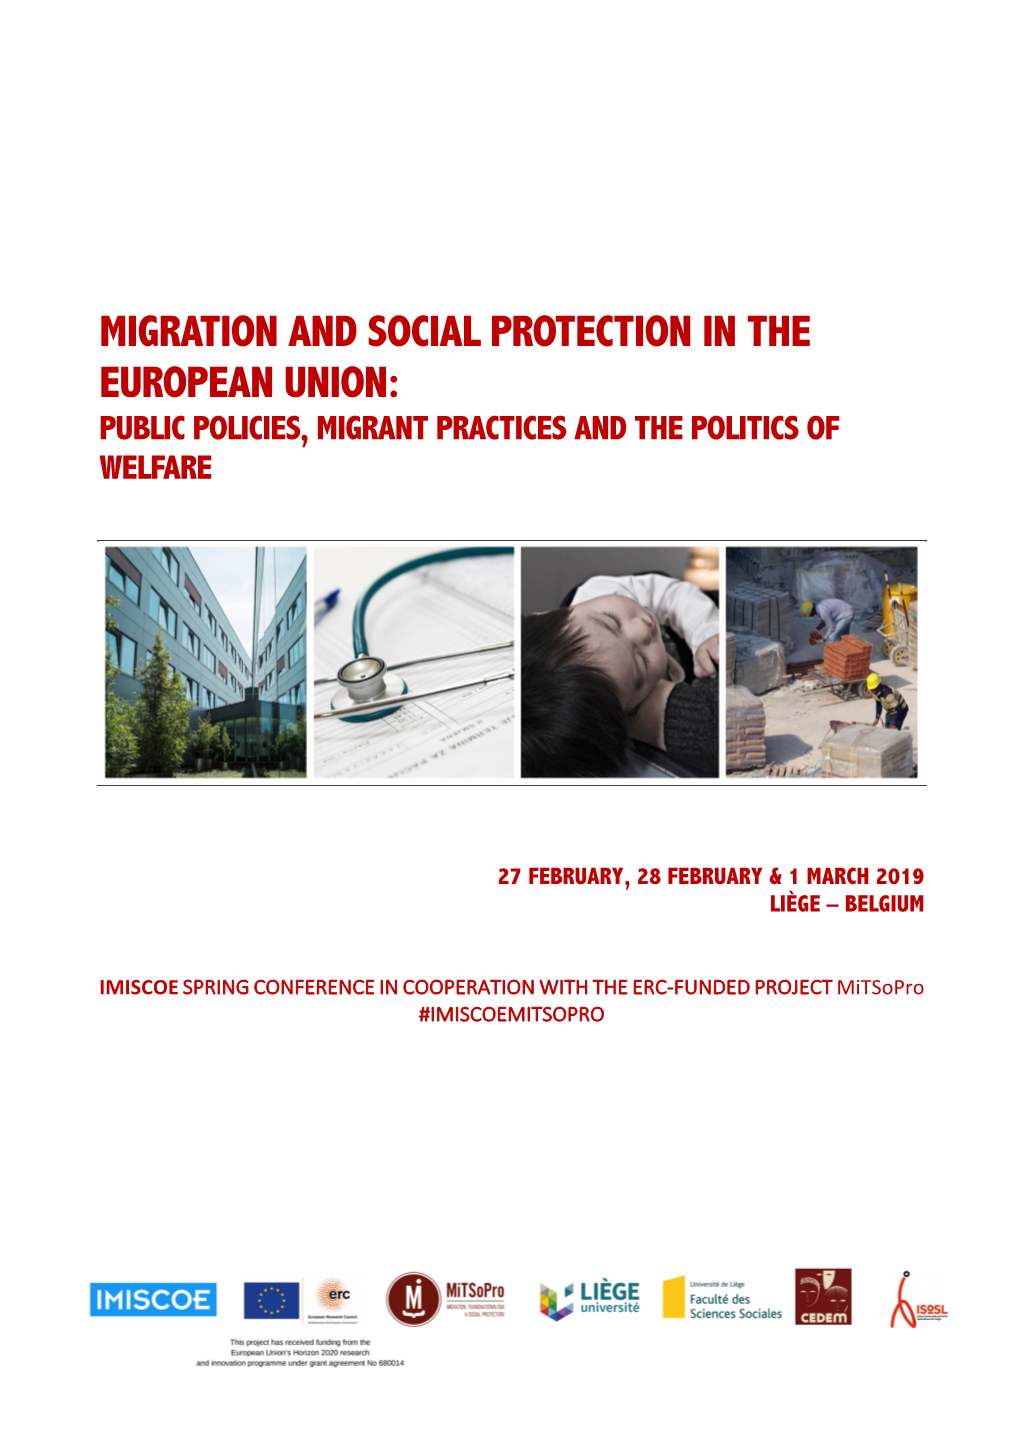 Migration and Social Protection in the European Union: Public Policies, Migrant Practices and the Politics of Welfare